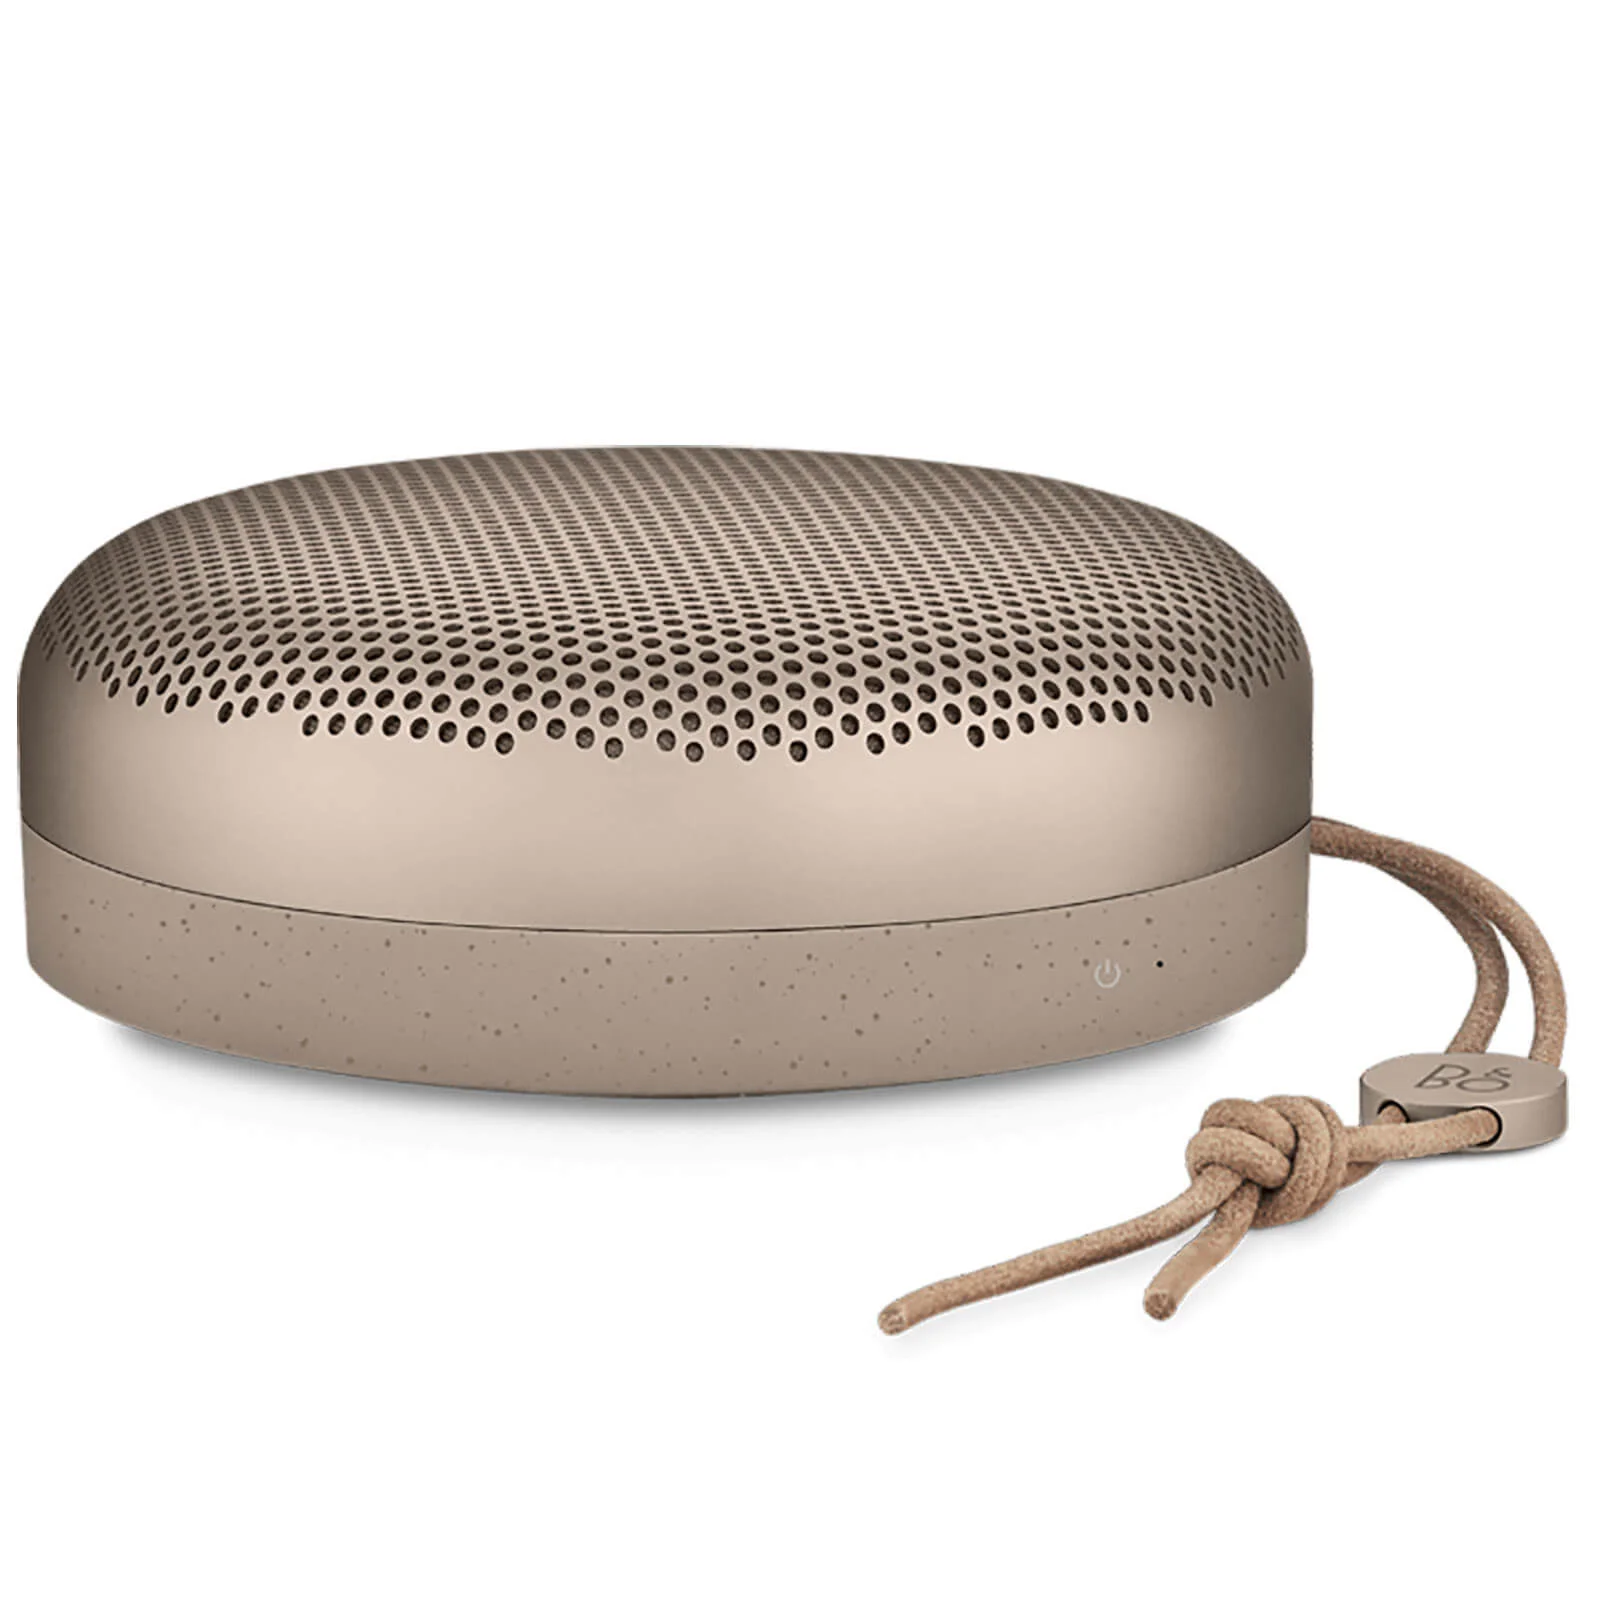 Bang & Olufsen BeoPlay A1 Portable Bluetooth Speaker - Clay Image 1